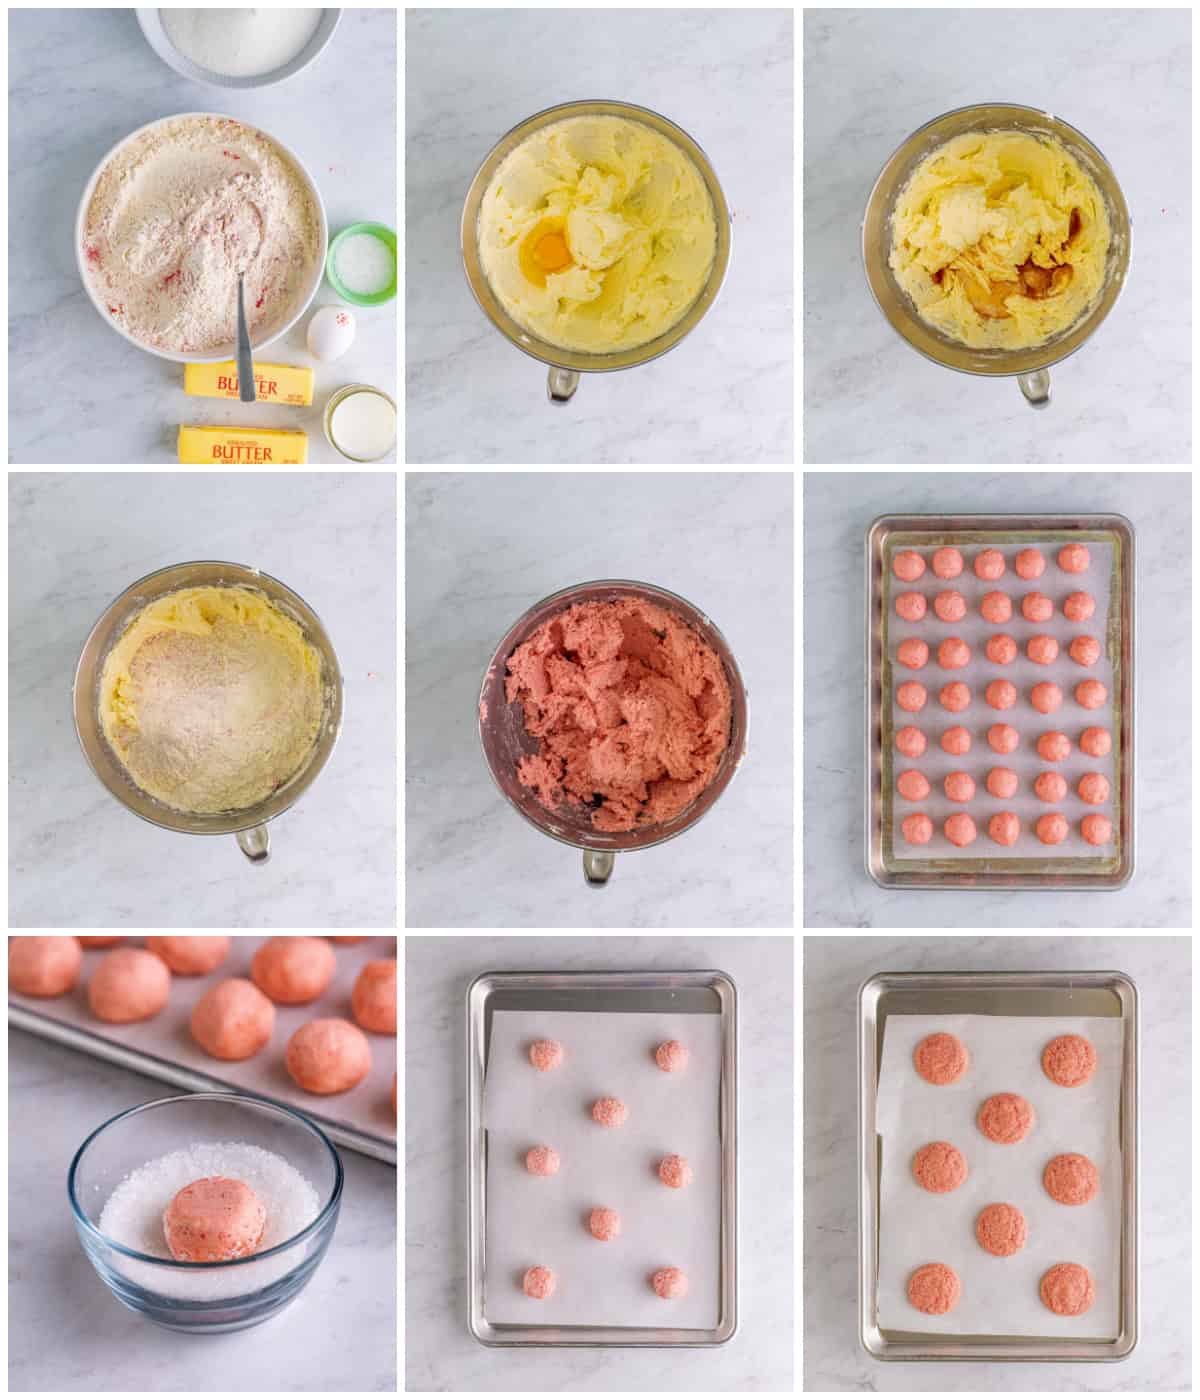 Step by step photos on how to make Strawberry Sugar Cookies.